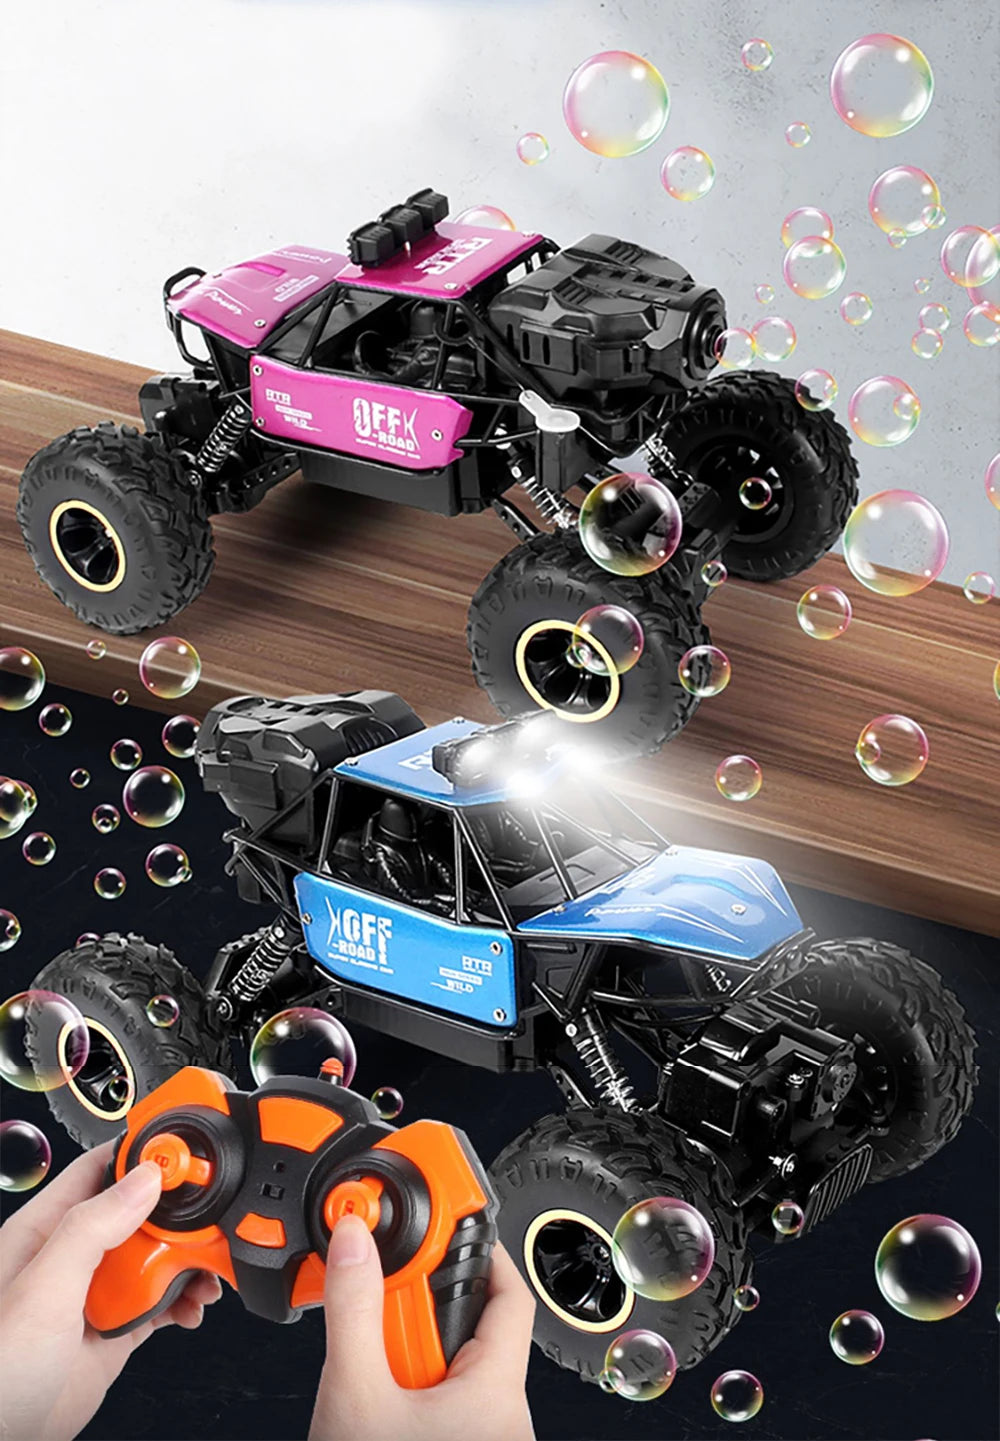 Paisible 4WD RC Car, two 1800mah battery can last about 120 minutes